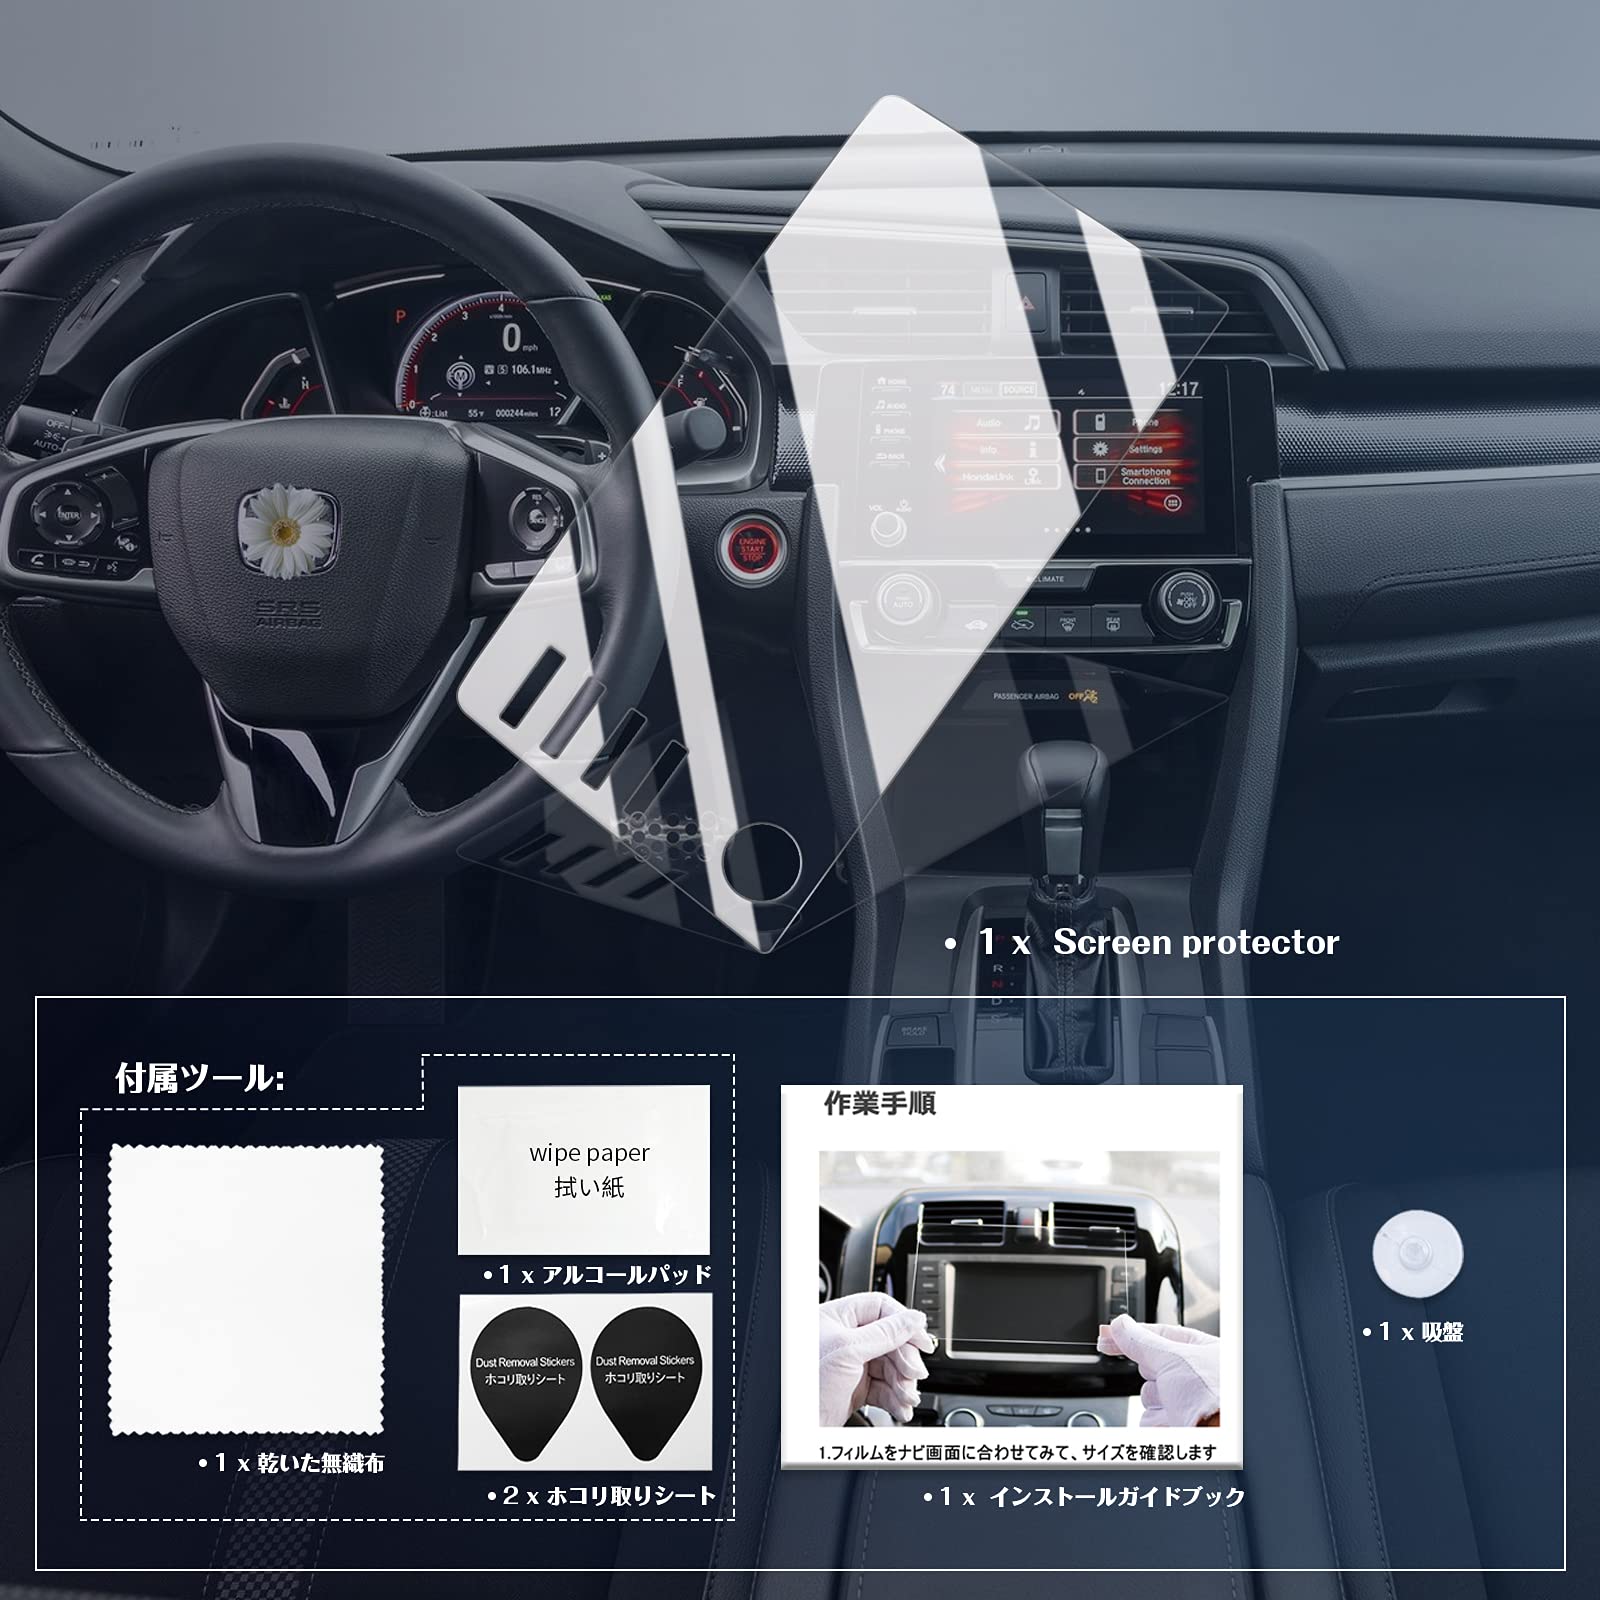 BIXUAN 2019 2020 2021 Civic Screen Protector Design for Honda 2019-2021 10th Gen Civic Sport, EX, EX-L Infotainment System without Navigation 7-inch Screen Tempered Glass Protective Film Civic 2019 2020 2021 Accessories (4-Buttons)